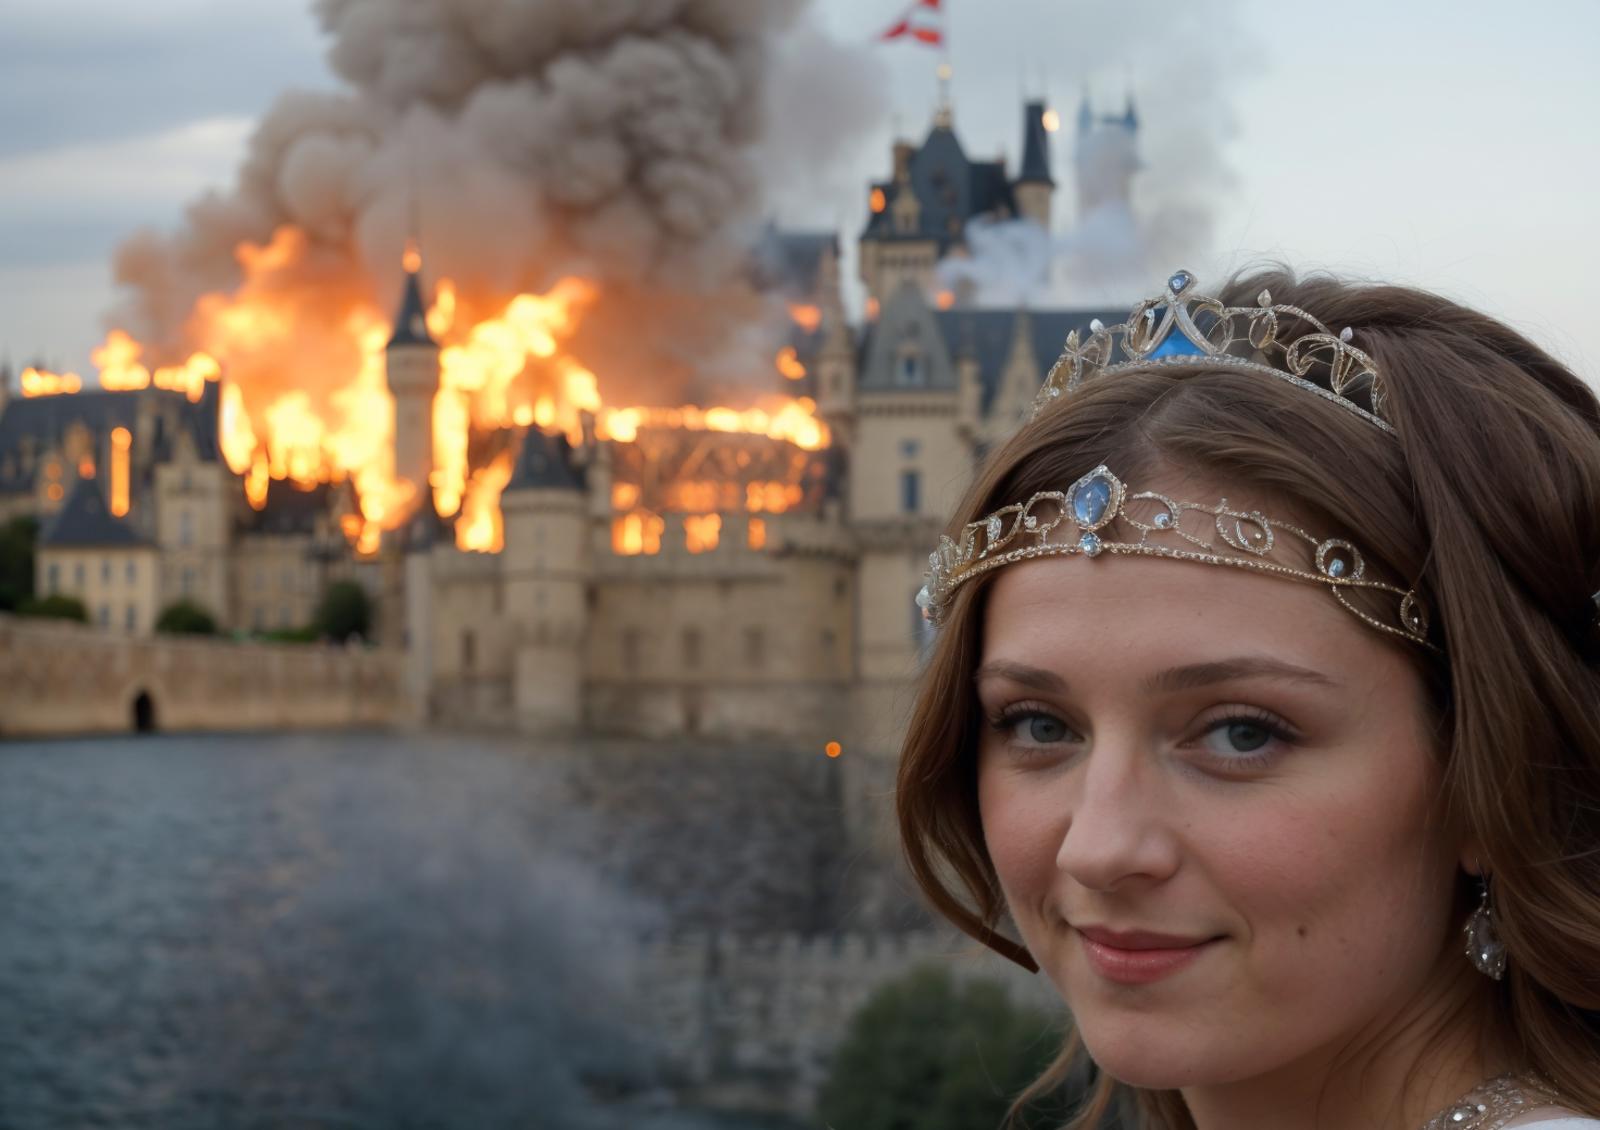 A young woman with a crown is posing in front of a large castle, which is on fire.